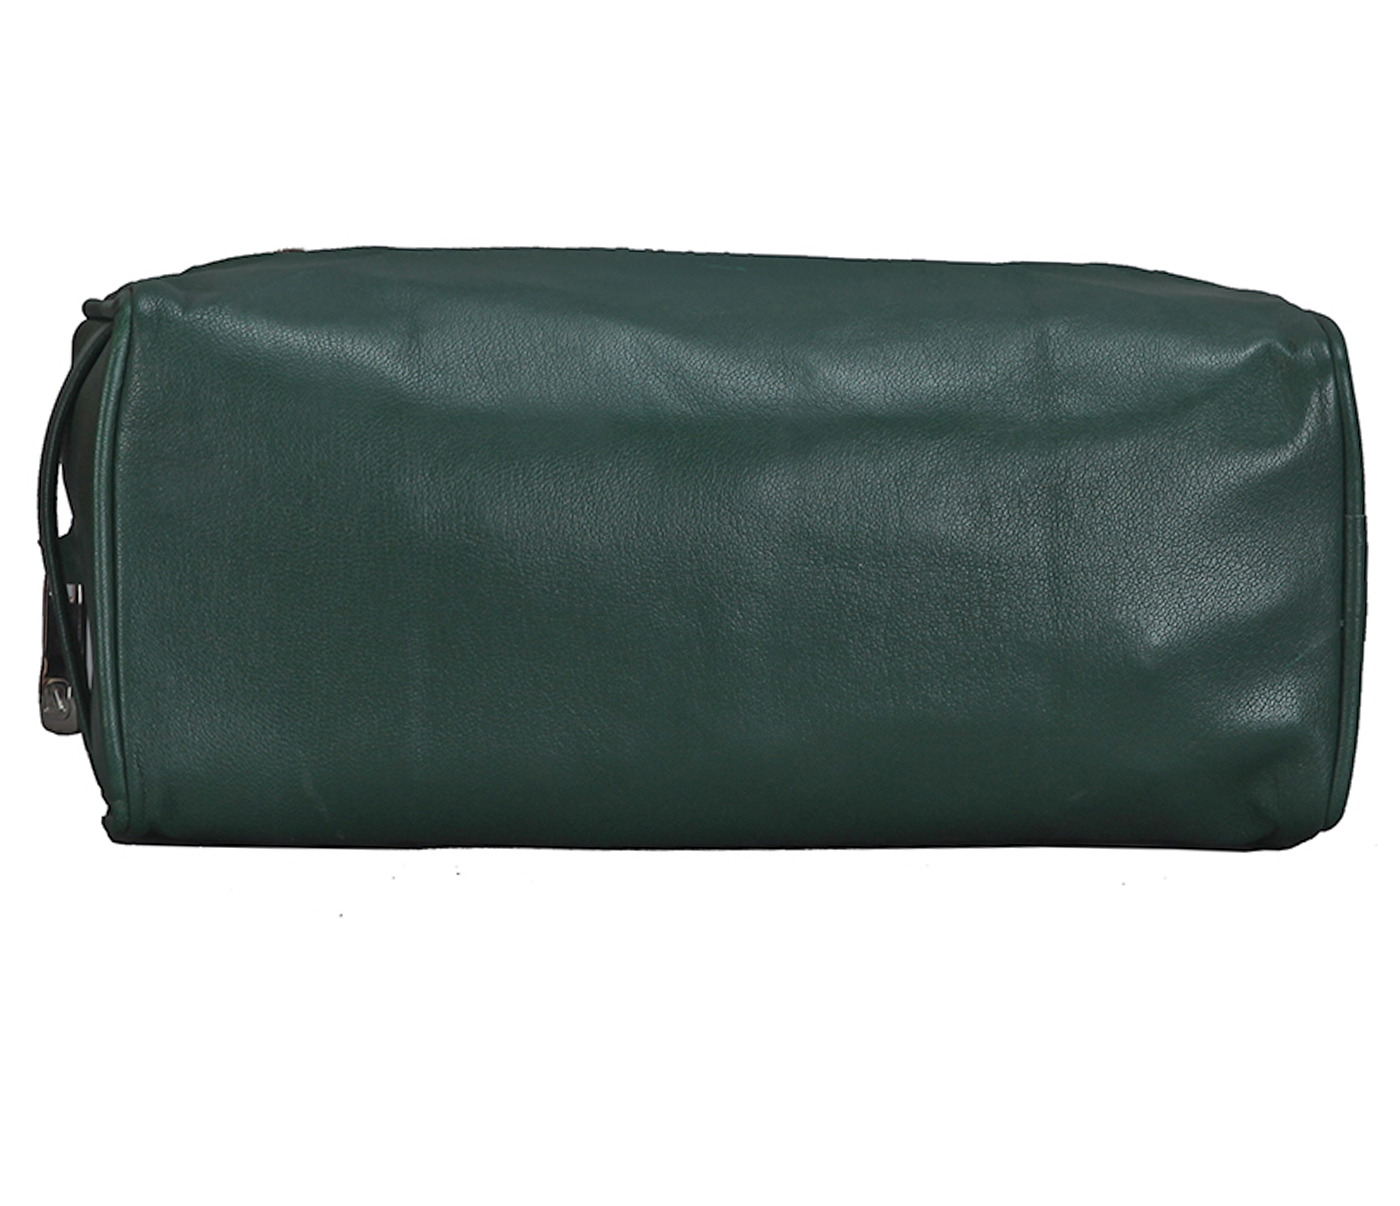 SC1--Unisex Wash & Toiletry travel Bag in Genuine Leather - Green